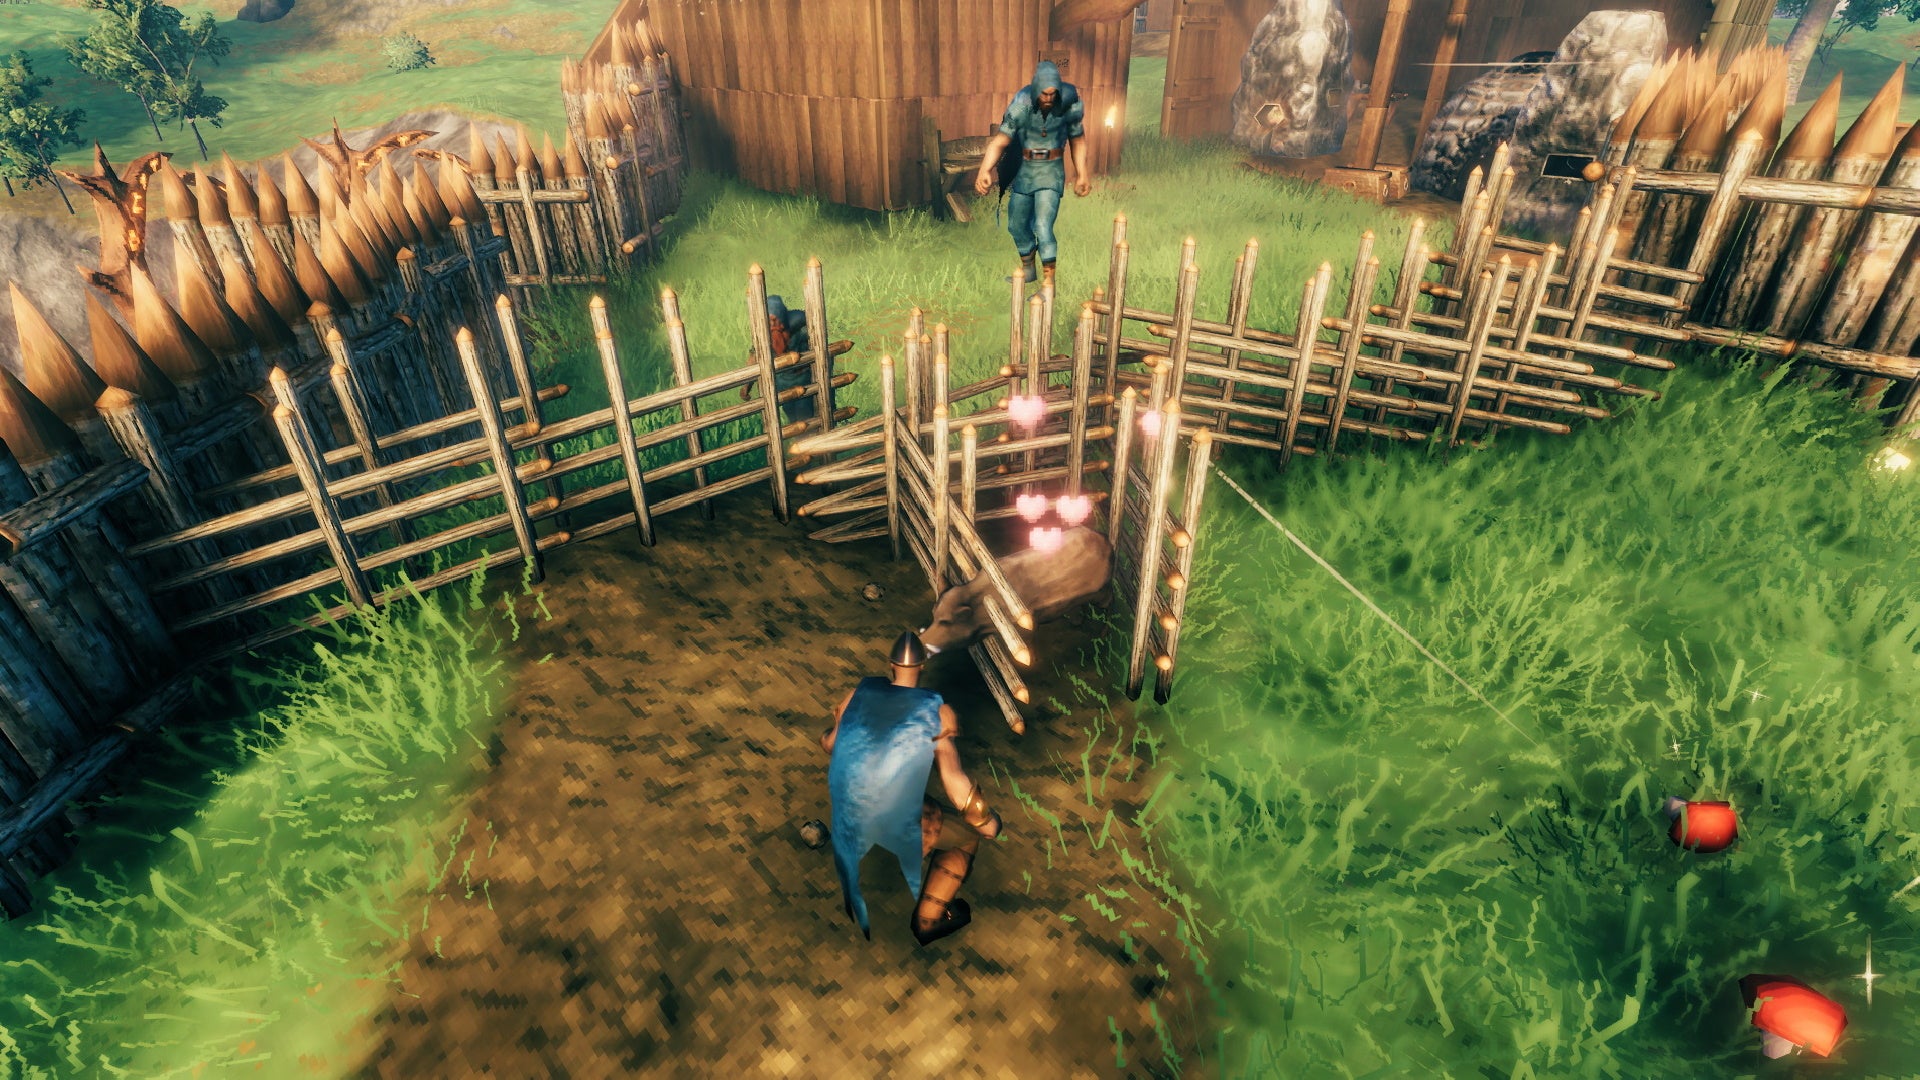 A screenshot from Valheim, which shows a boar impaled on some spikes, yet still alive and happy.